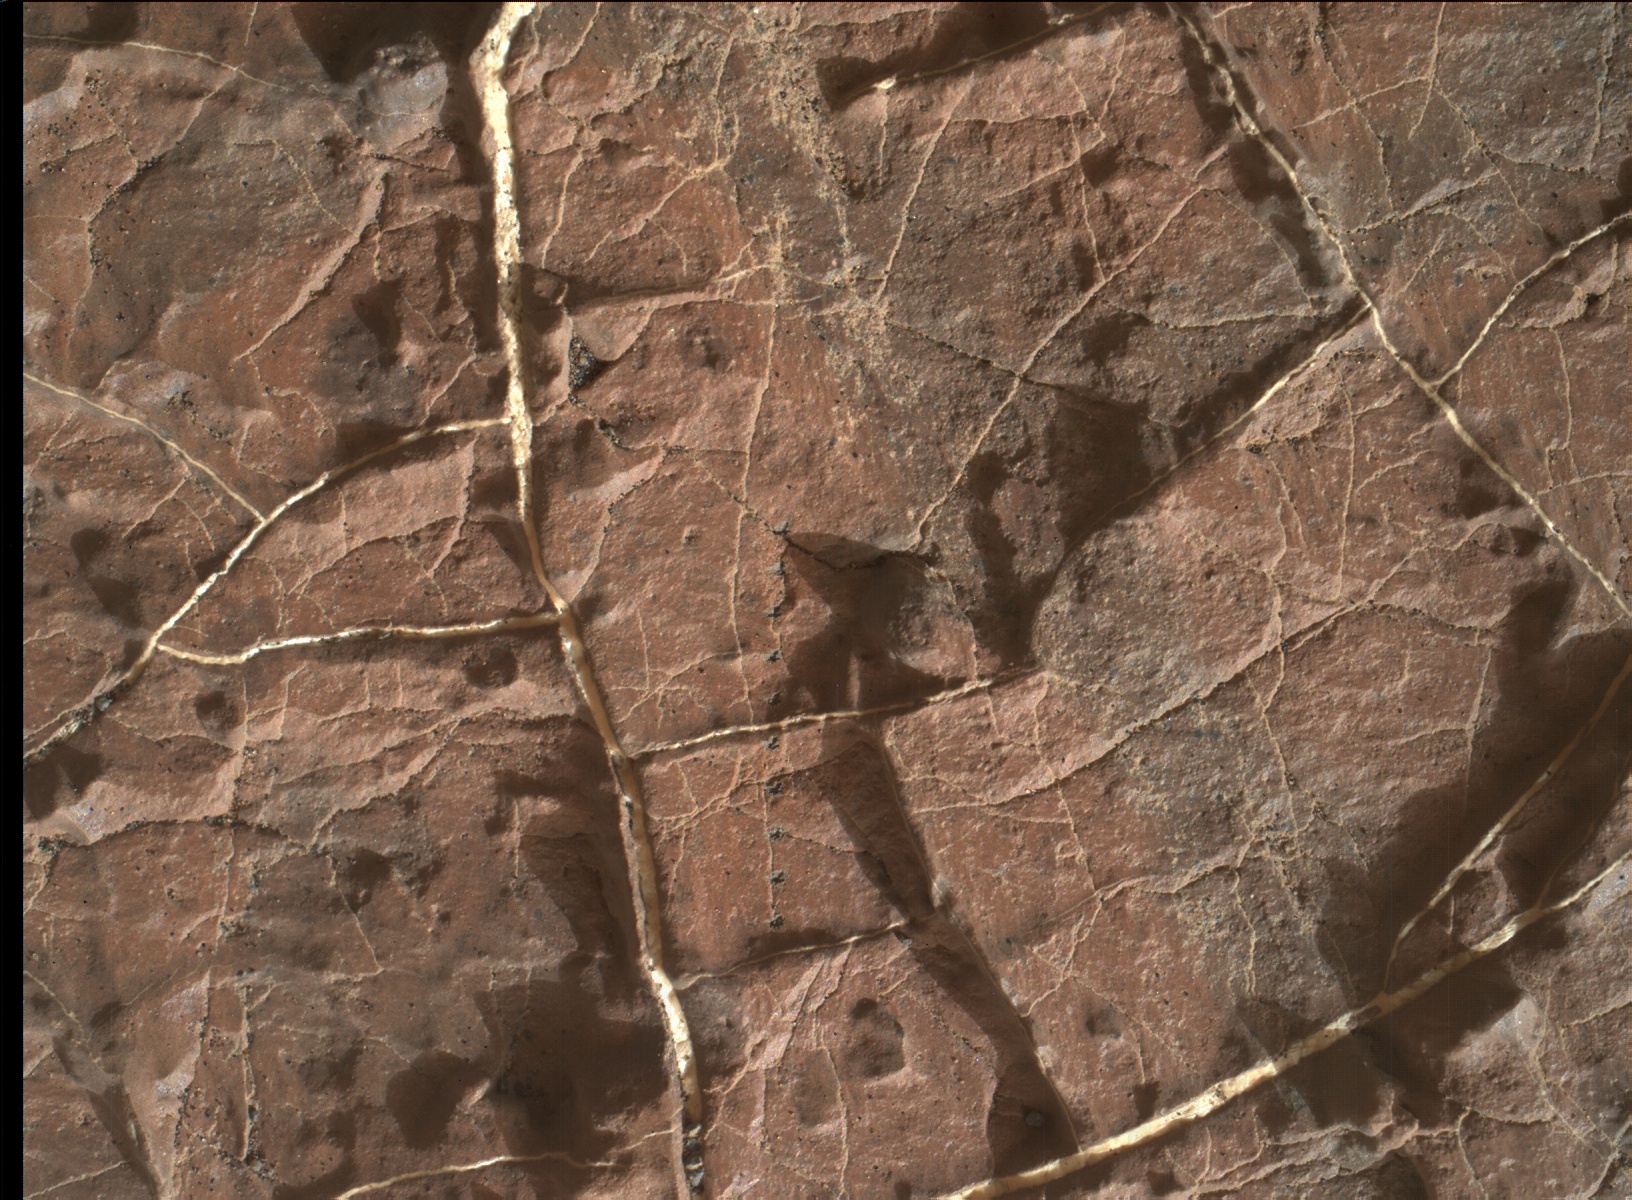 Nasa's Mars rover Curiosity acquired this image using its Mars Hand Lens Imager (MAHLI) on Sol 1569